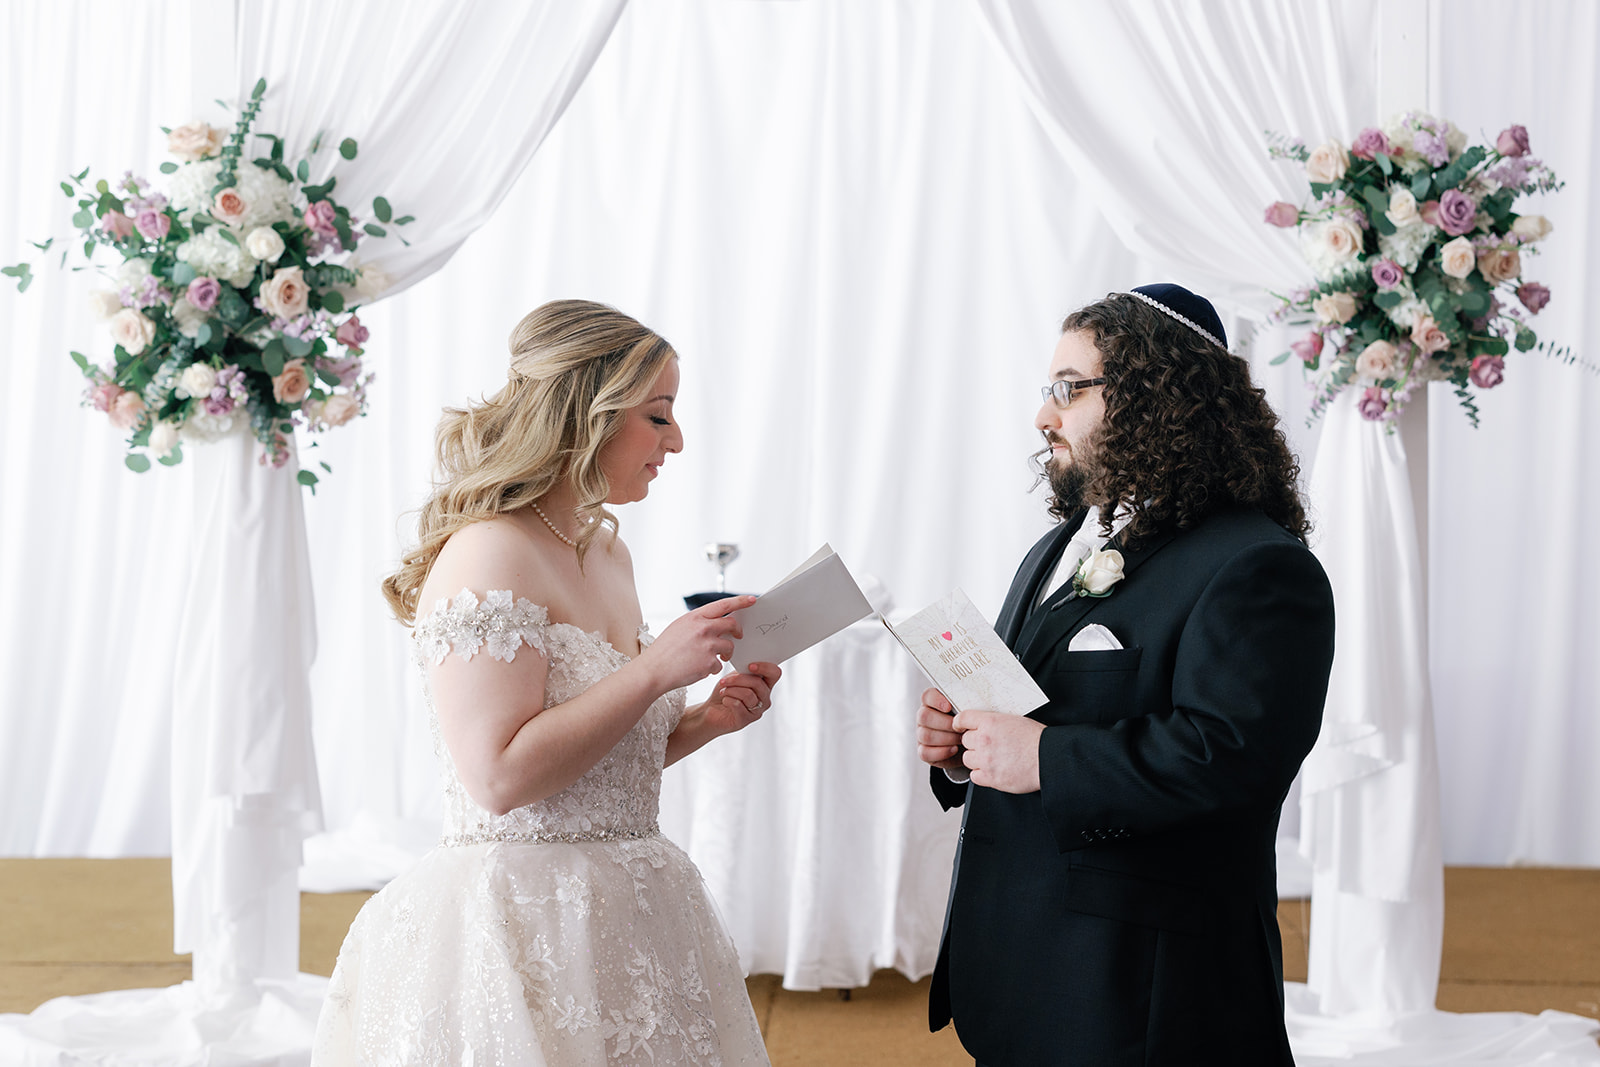 Newlyweds read each other cards they wrote for each other while standing at an altar